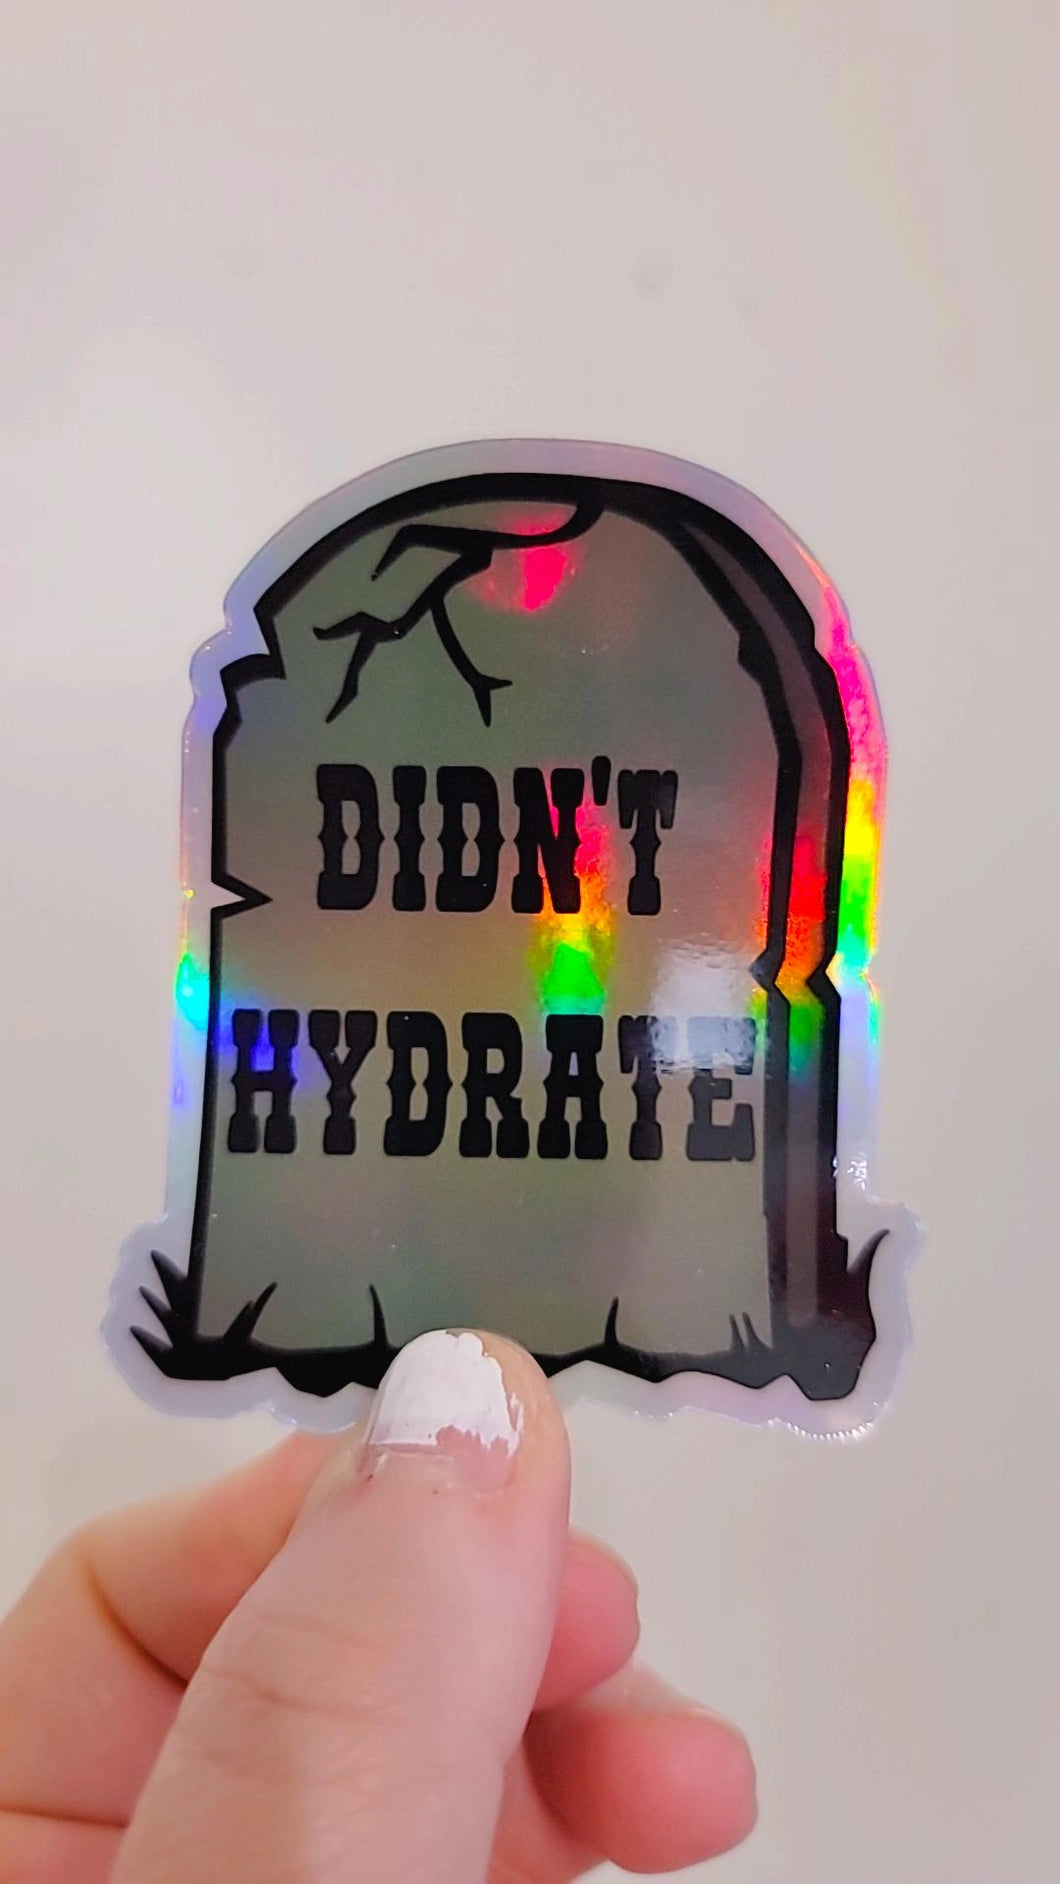 Holographic Didn’t Hydrate Sticker